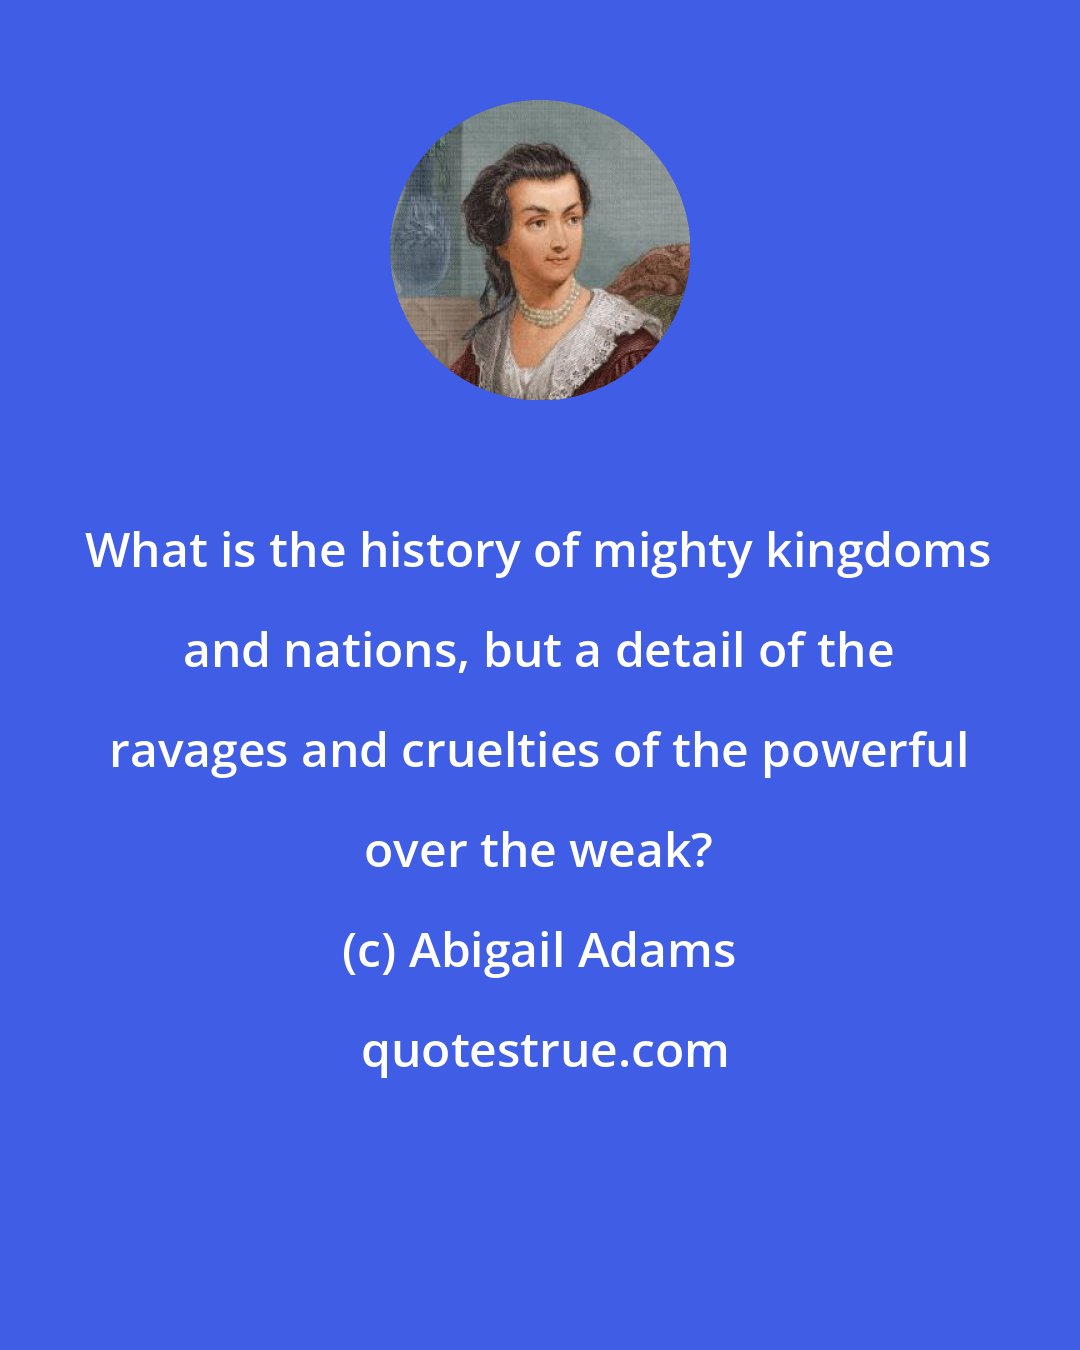 Abigail Adams: What is the history of mighty kingdoms and nations, but a detail of the ravages and cruelties of the powerful over the weak?